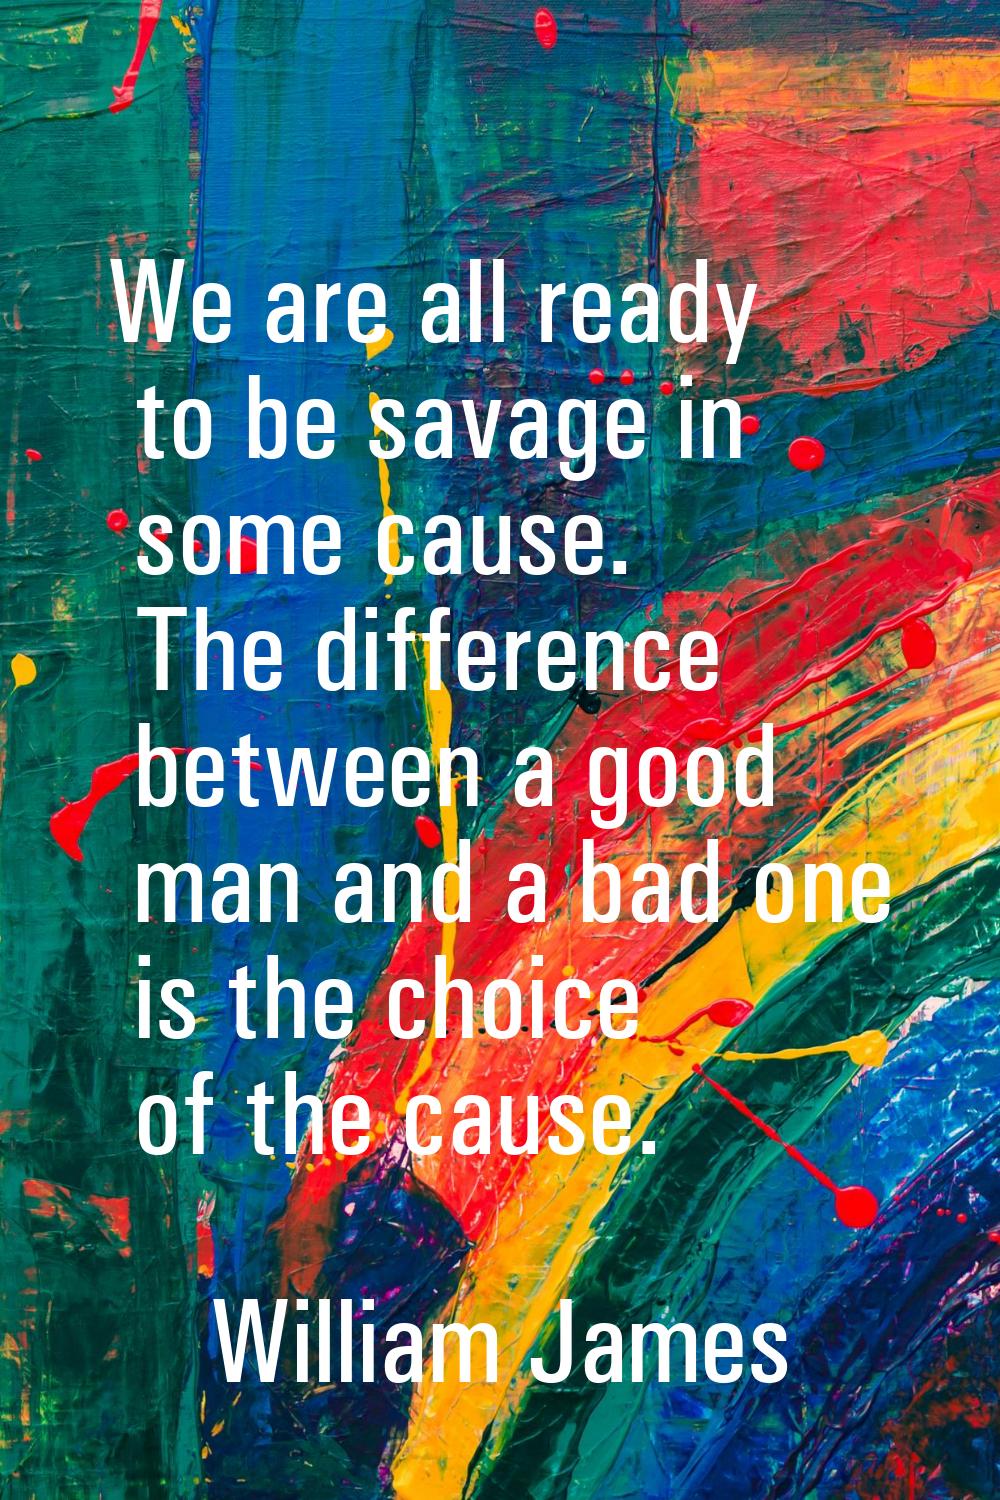 We are all ready to be savage in some cause. The difference between a good man and a bad one is the